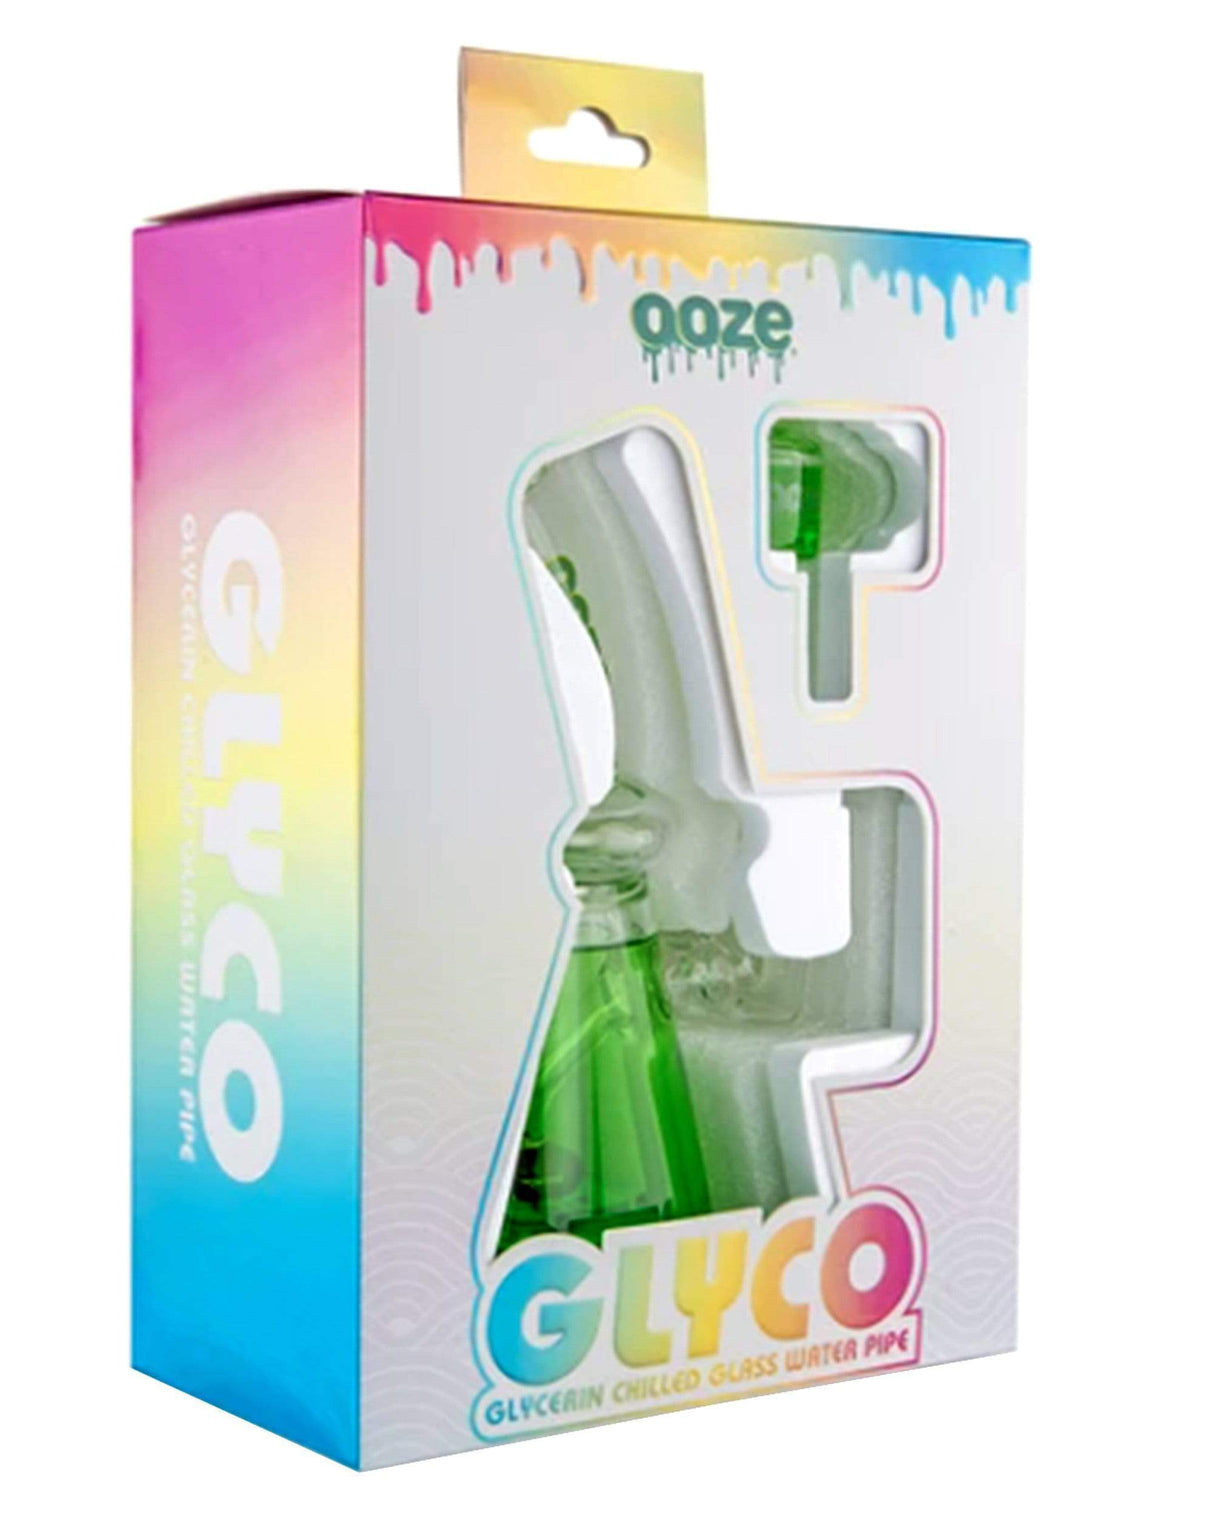 Ooze Glyco Glycerin Chilled Water Pipe in green, displayed in colorful packaging, front view